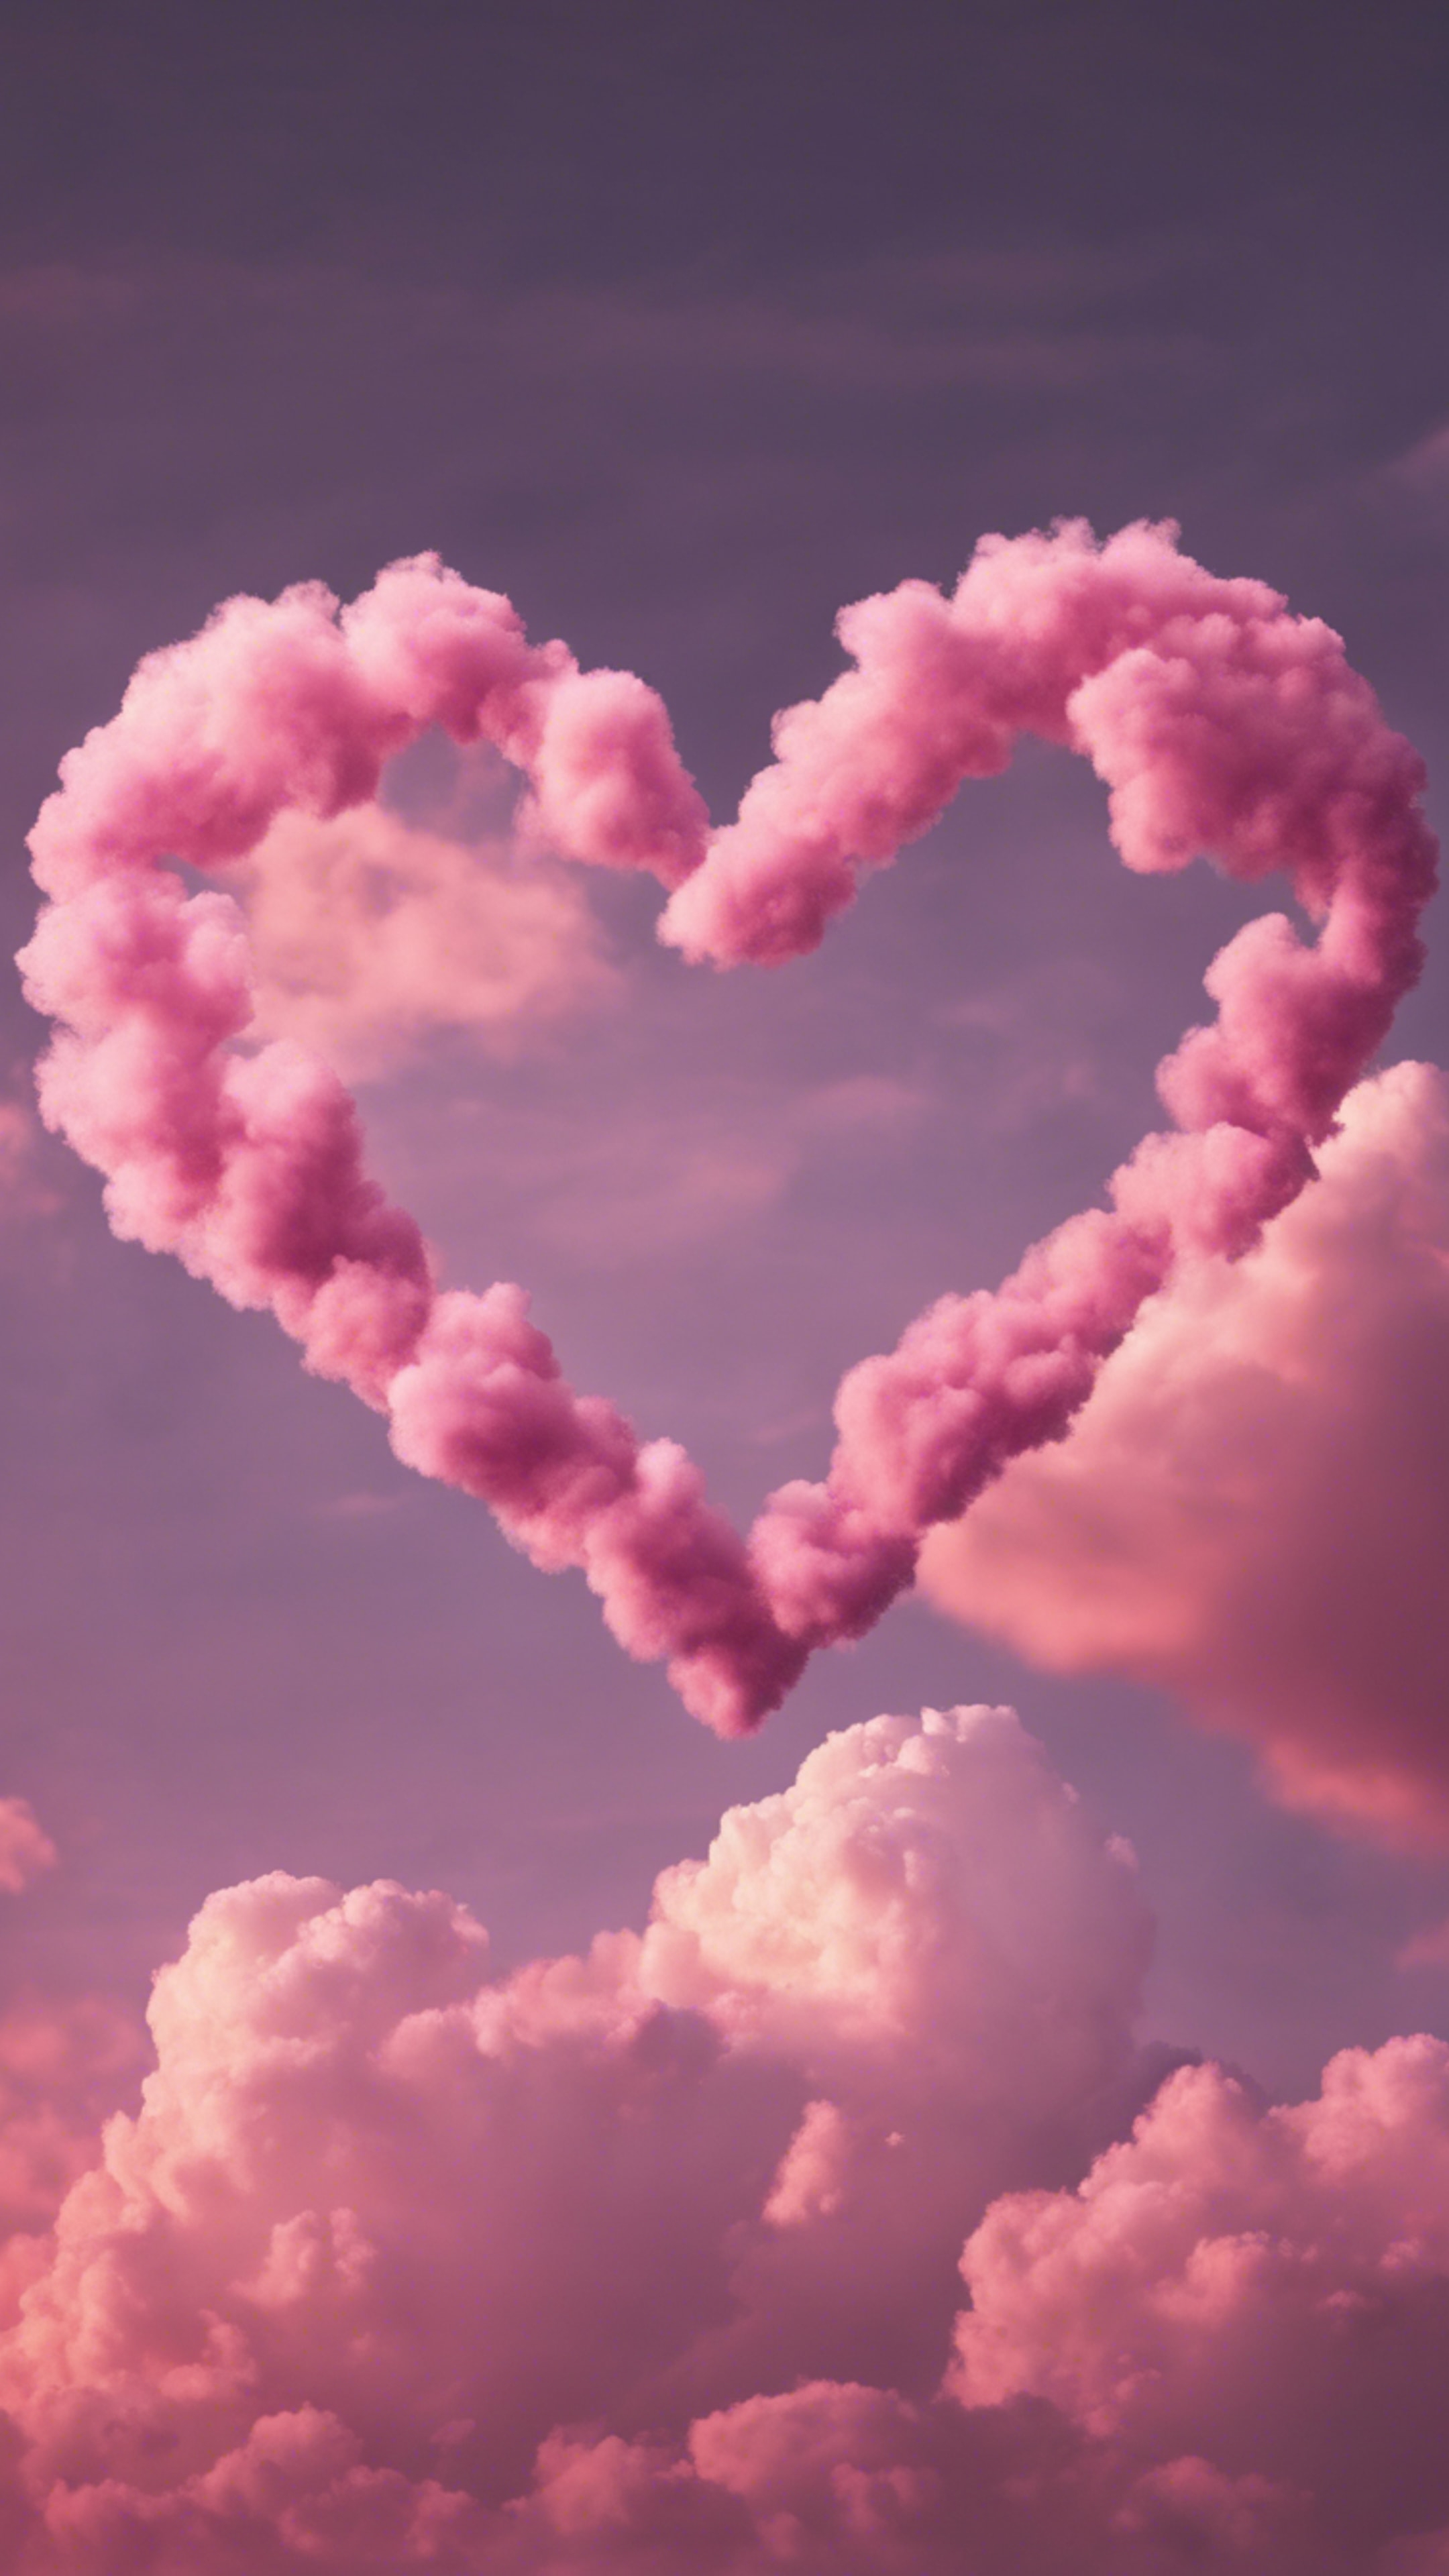 Pink heart-shaped clouds floating in the twilight sky. טפט[eb6690dc48484c9aa4c9]